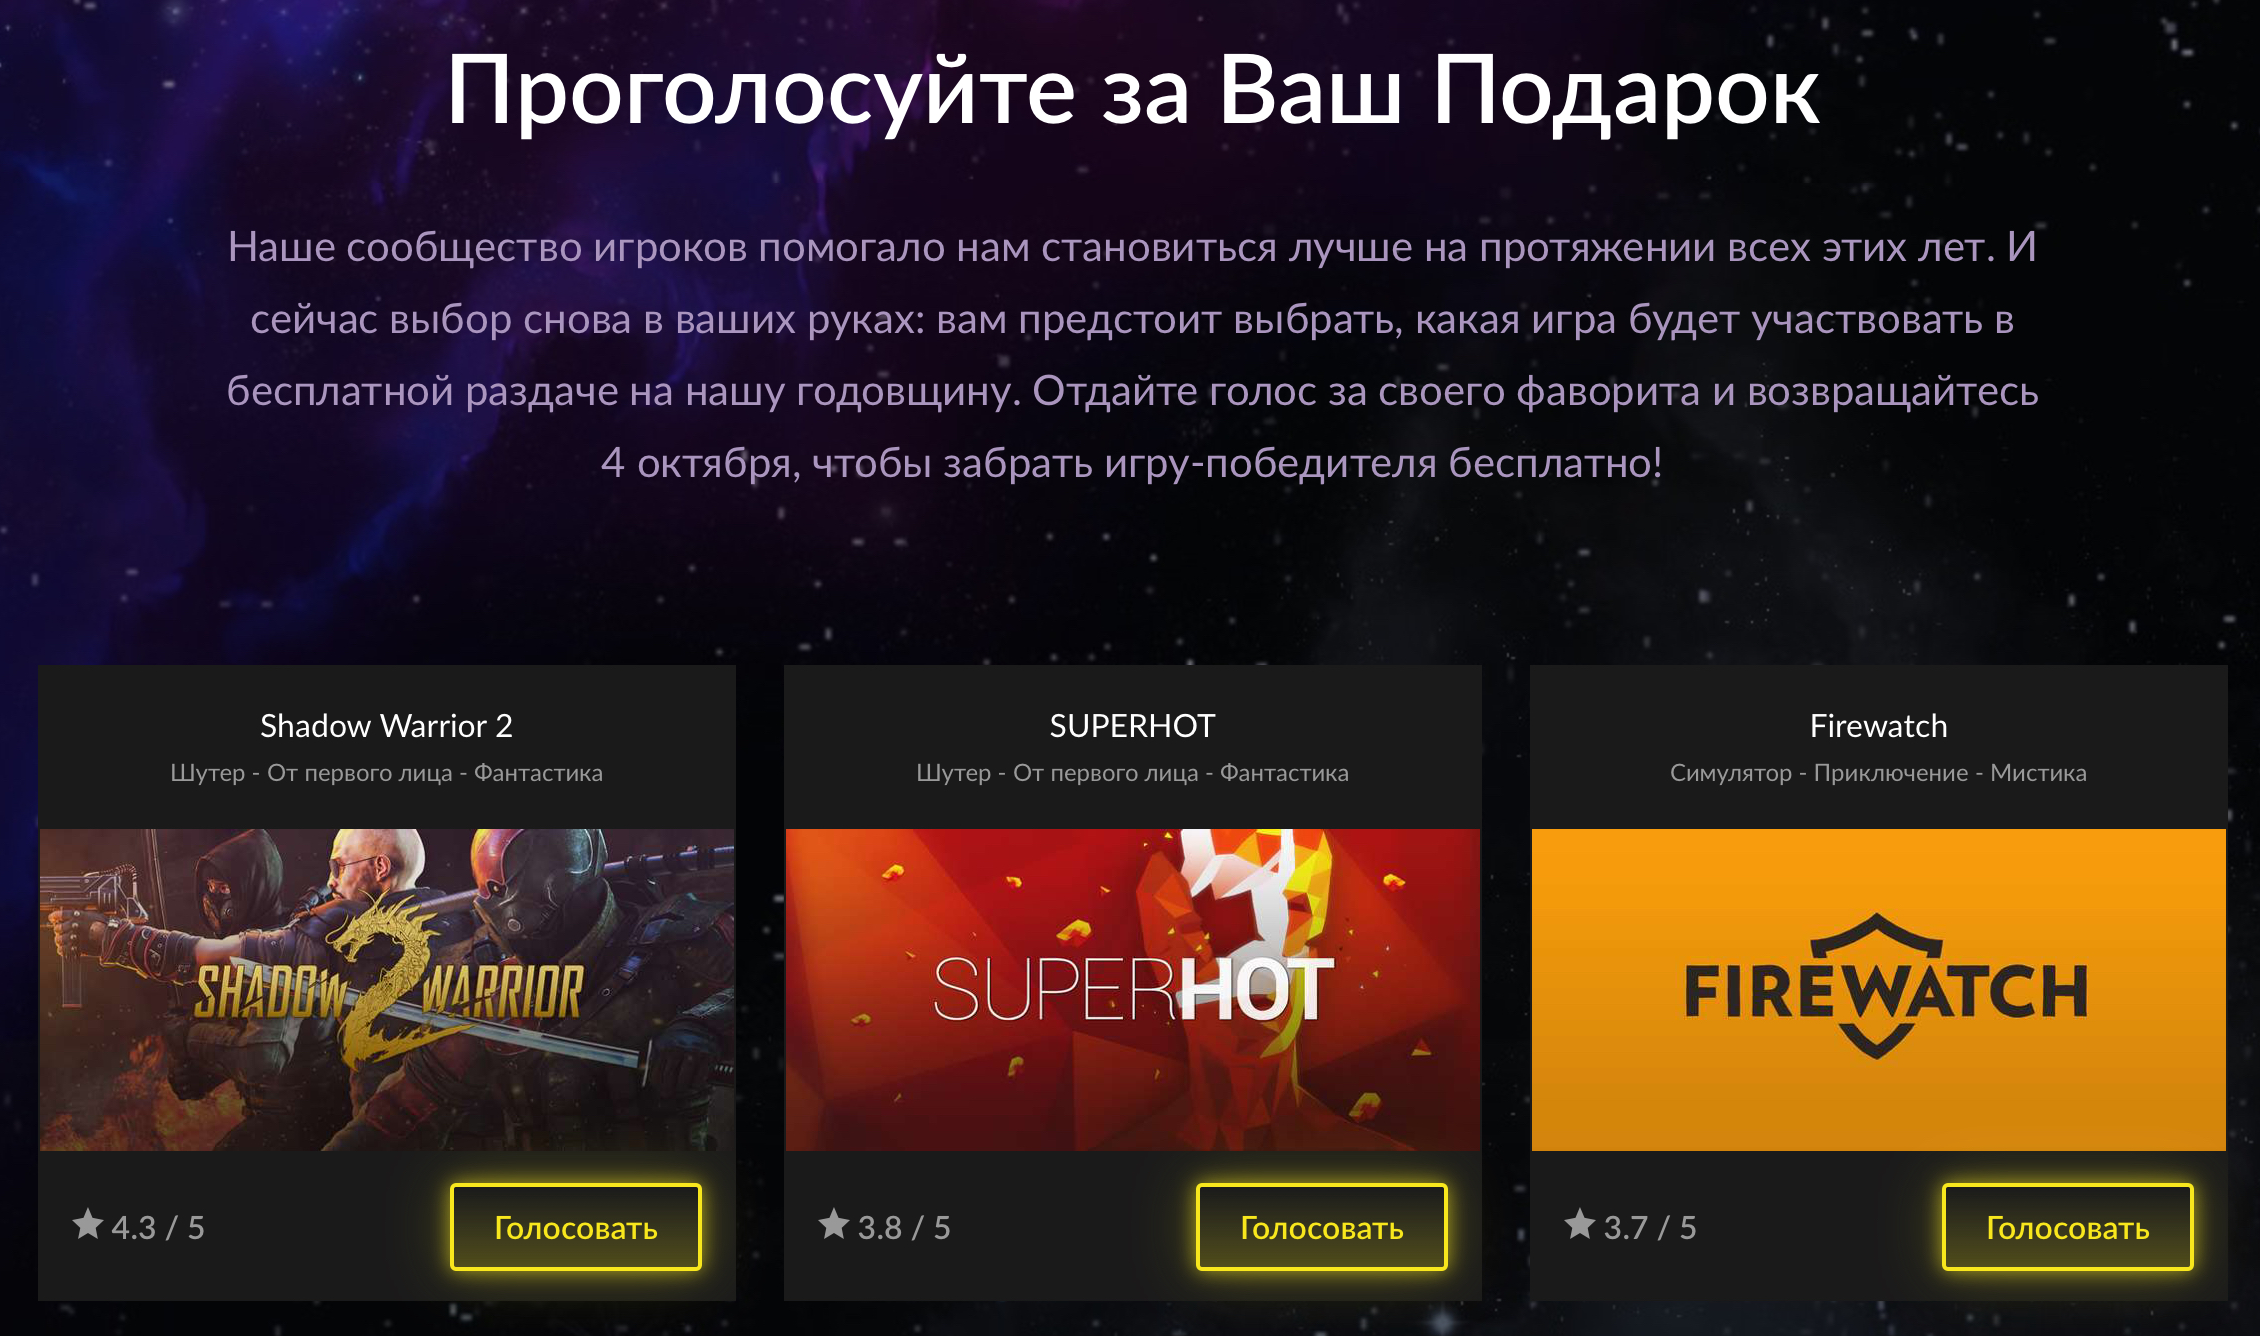 Game voting. Which игра. Голосование в игре. Игра Giveaway of the Day. GOG games.